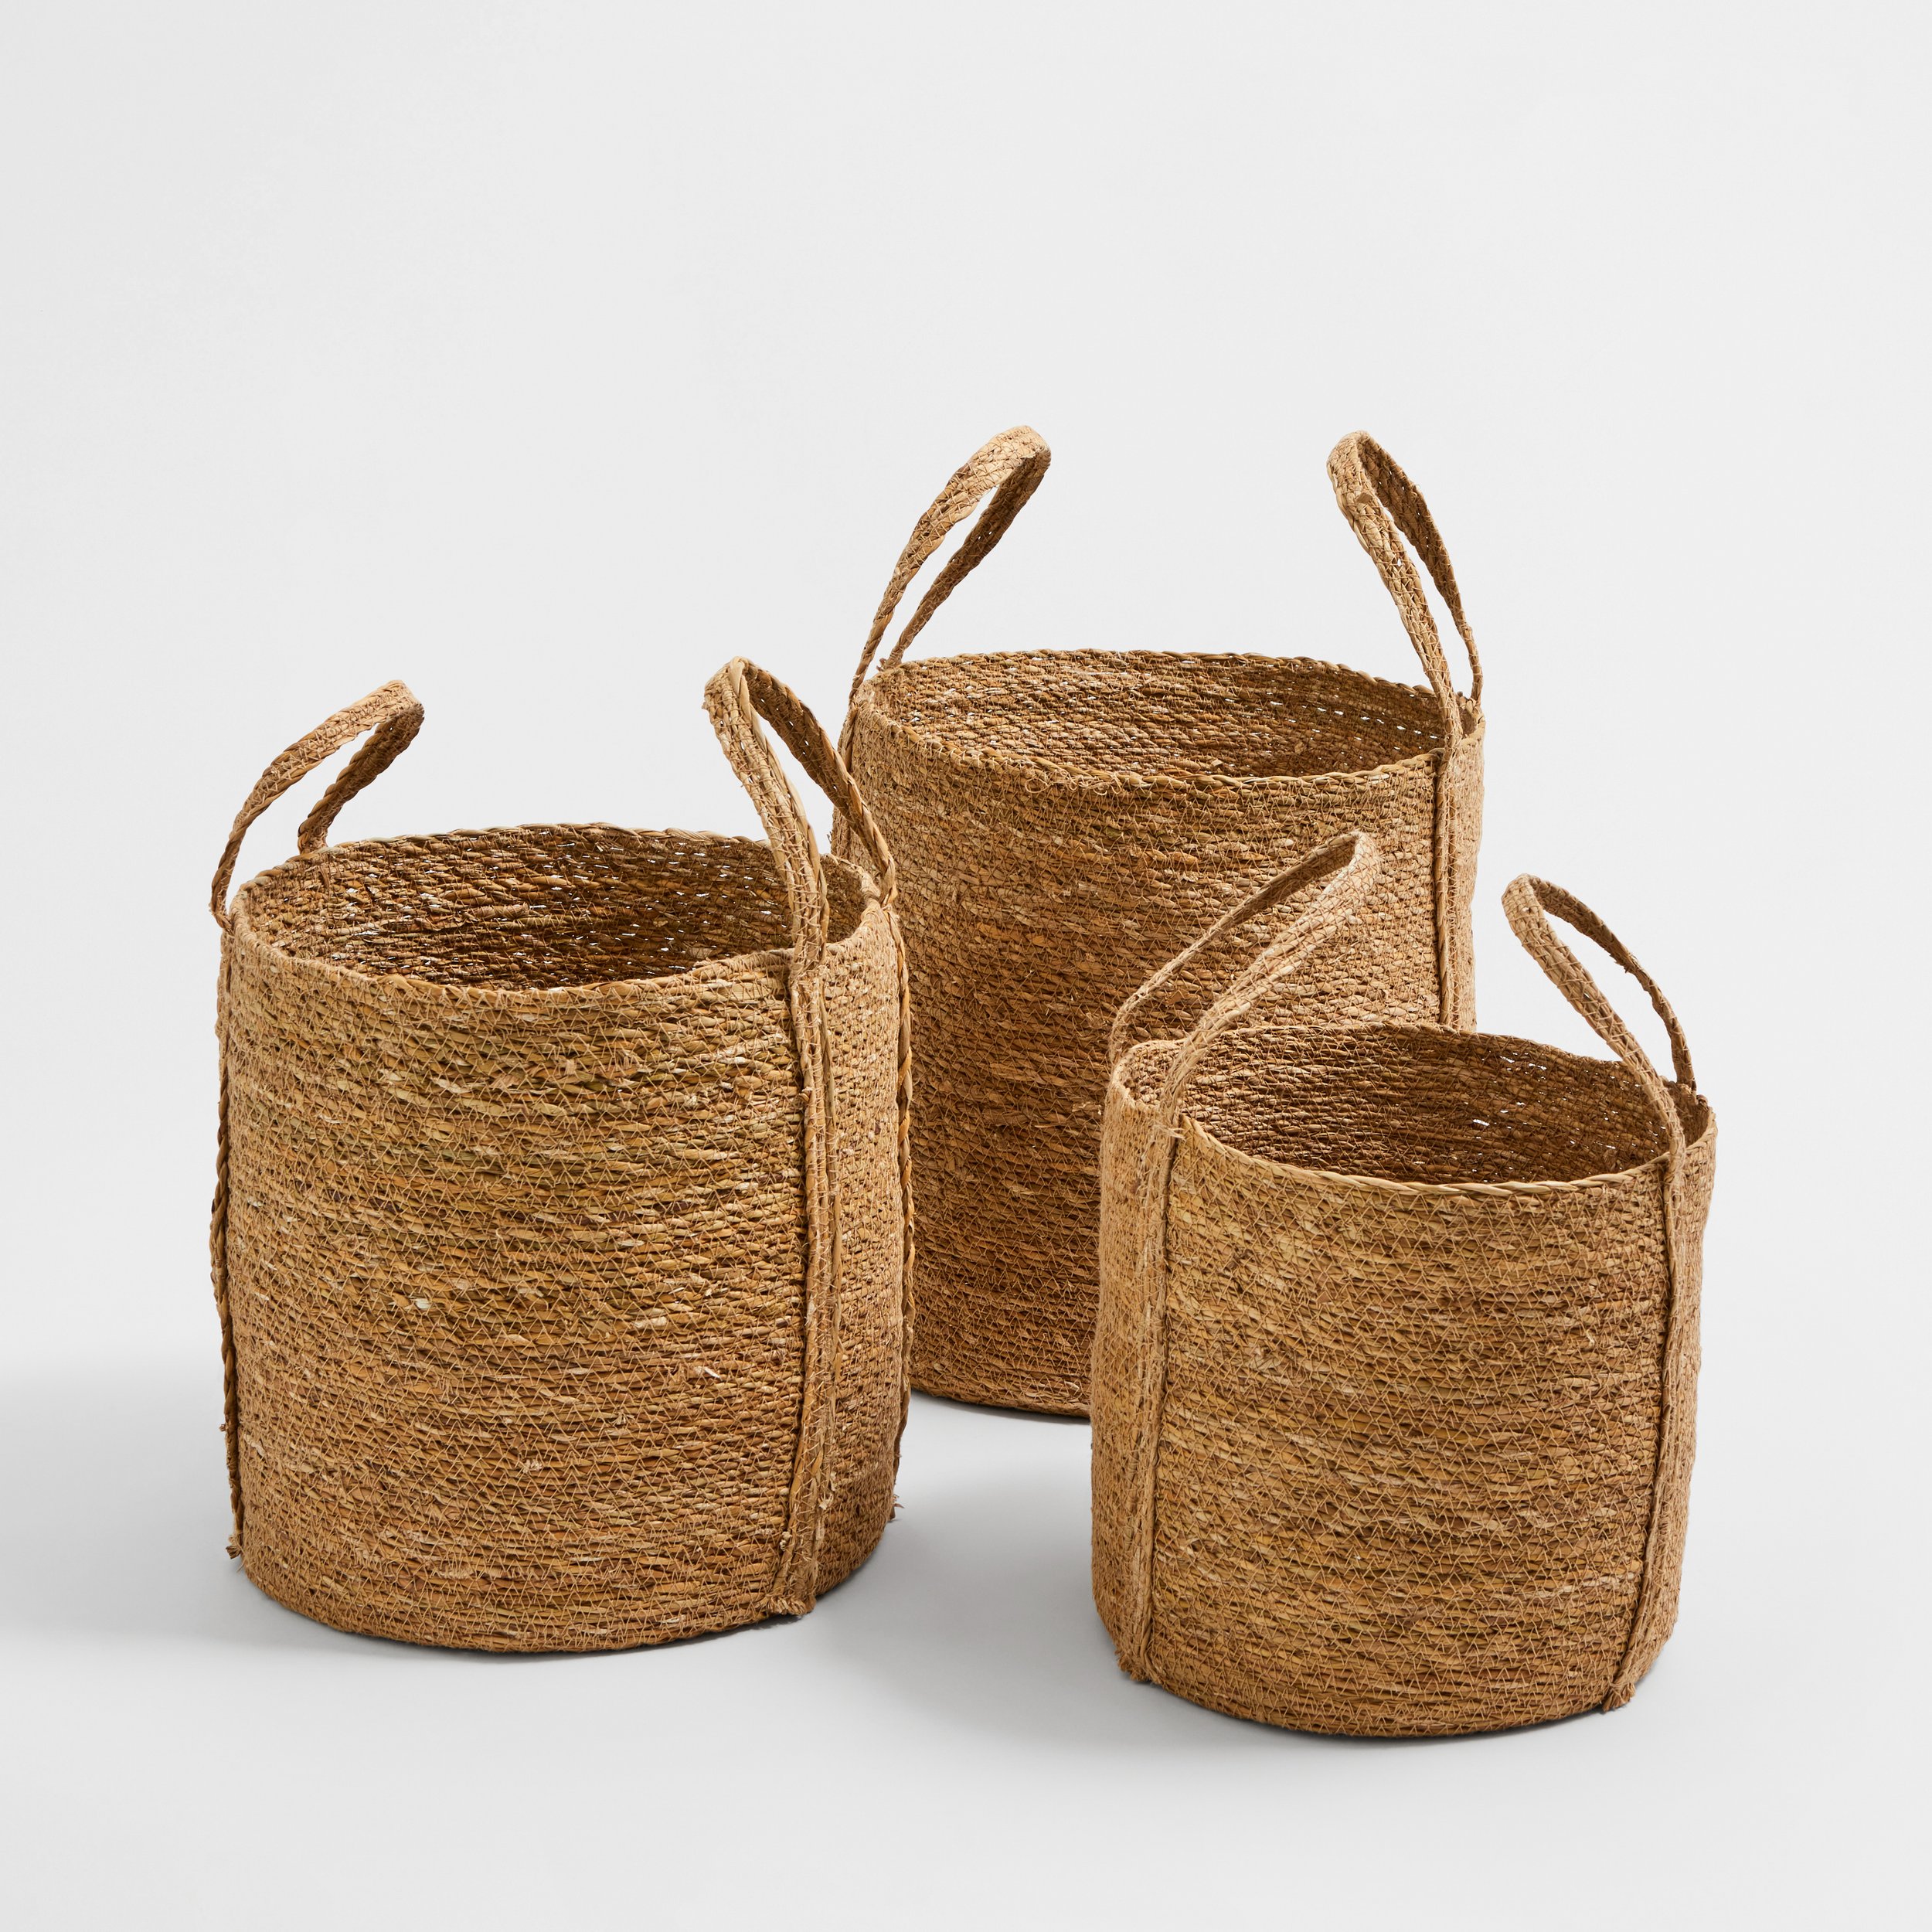 Napa-Home-and-Garden-Seagrass-Round-Baskets-with-Long-Handles-Set-of-3-Seagrass_Final_1.jpg